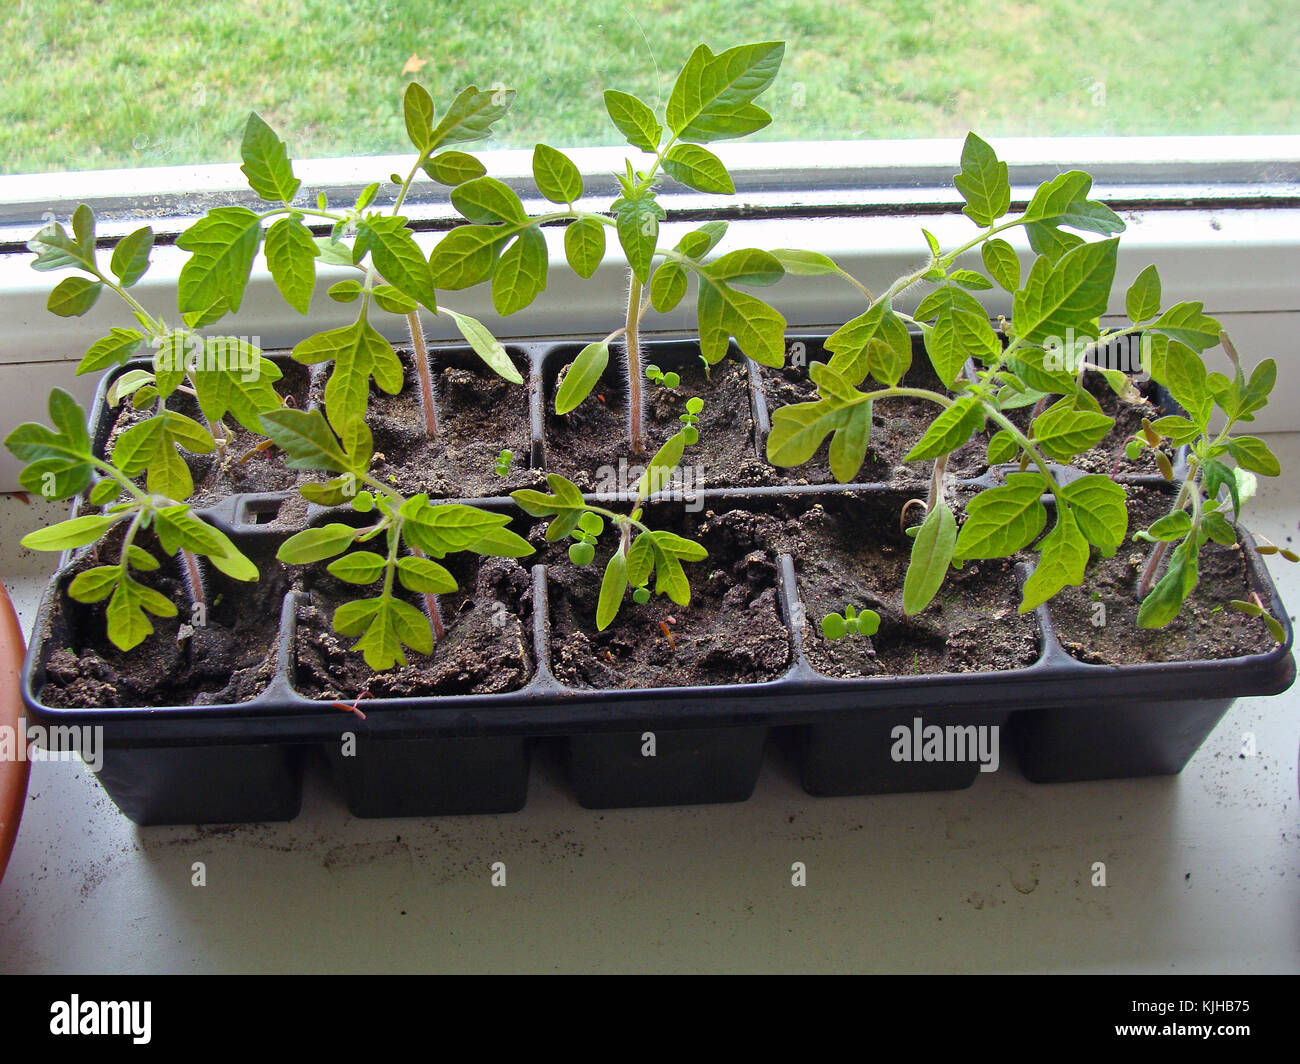 Tomato seedlings replanted in plastic box with sections on window sill indoor Stock Photo